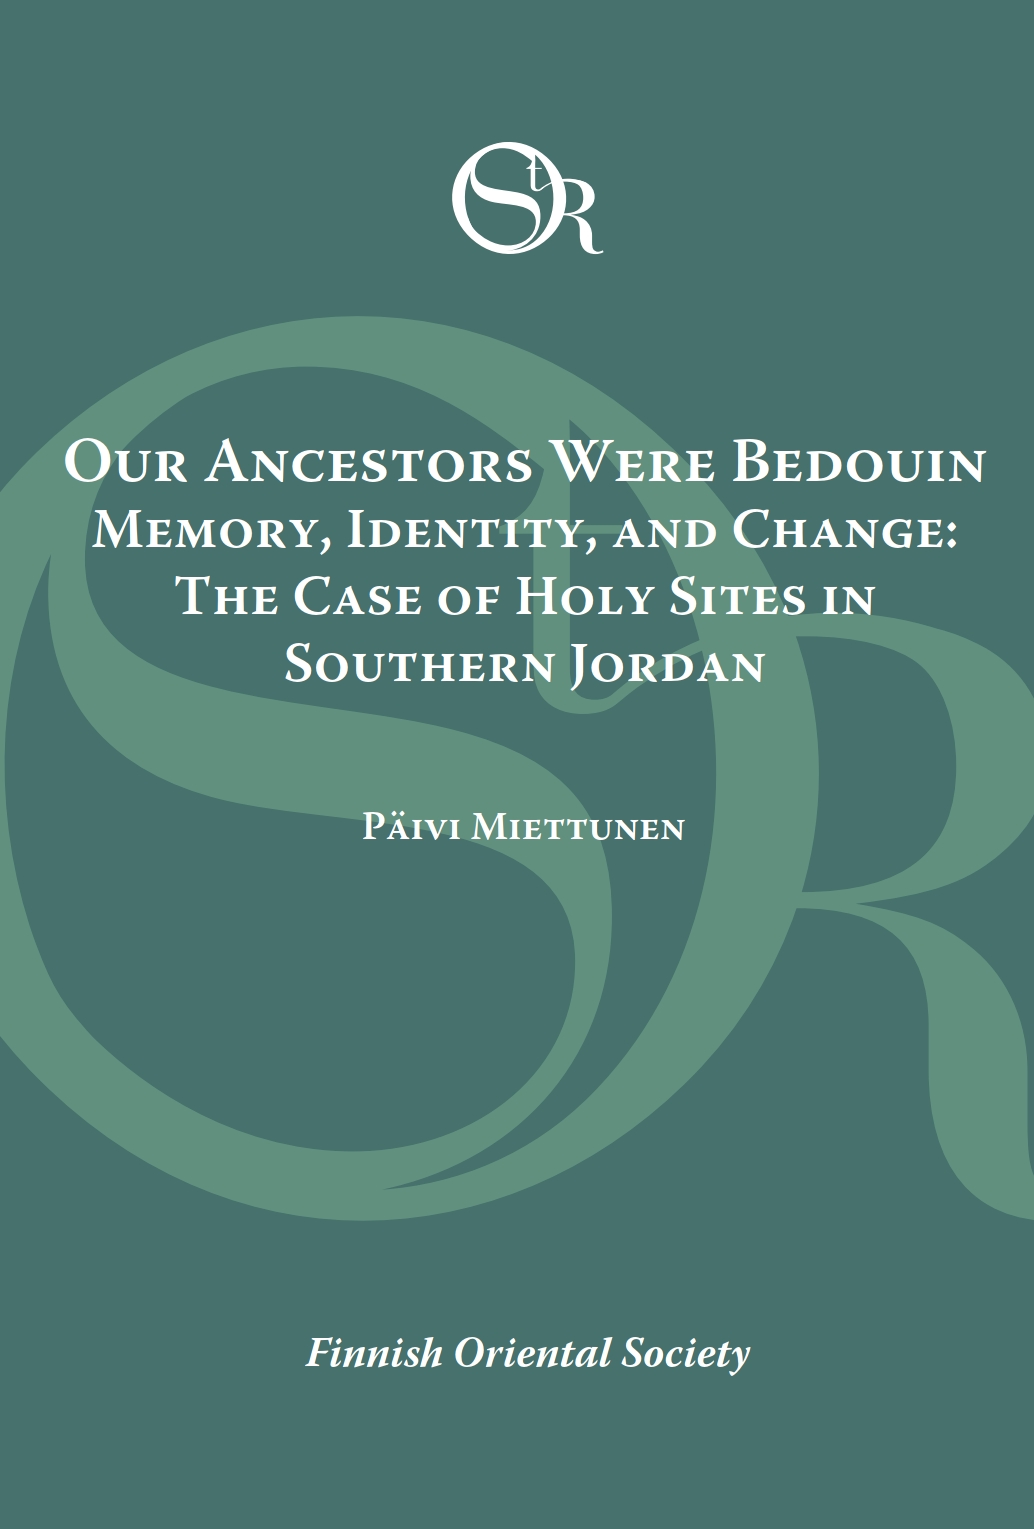 					View Vol. 122 (2021): Our Ancestors Were Bedouin – Memory, Identity, and Change: The Case of Holy Sites in Southern Jordan
				